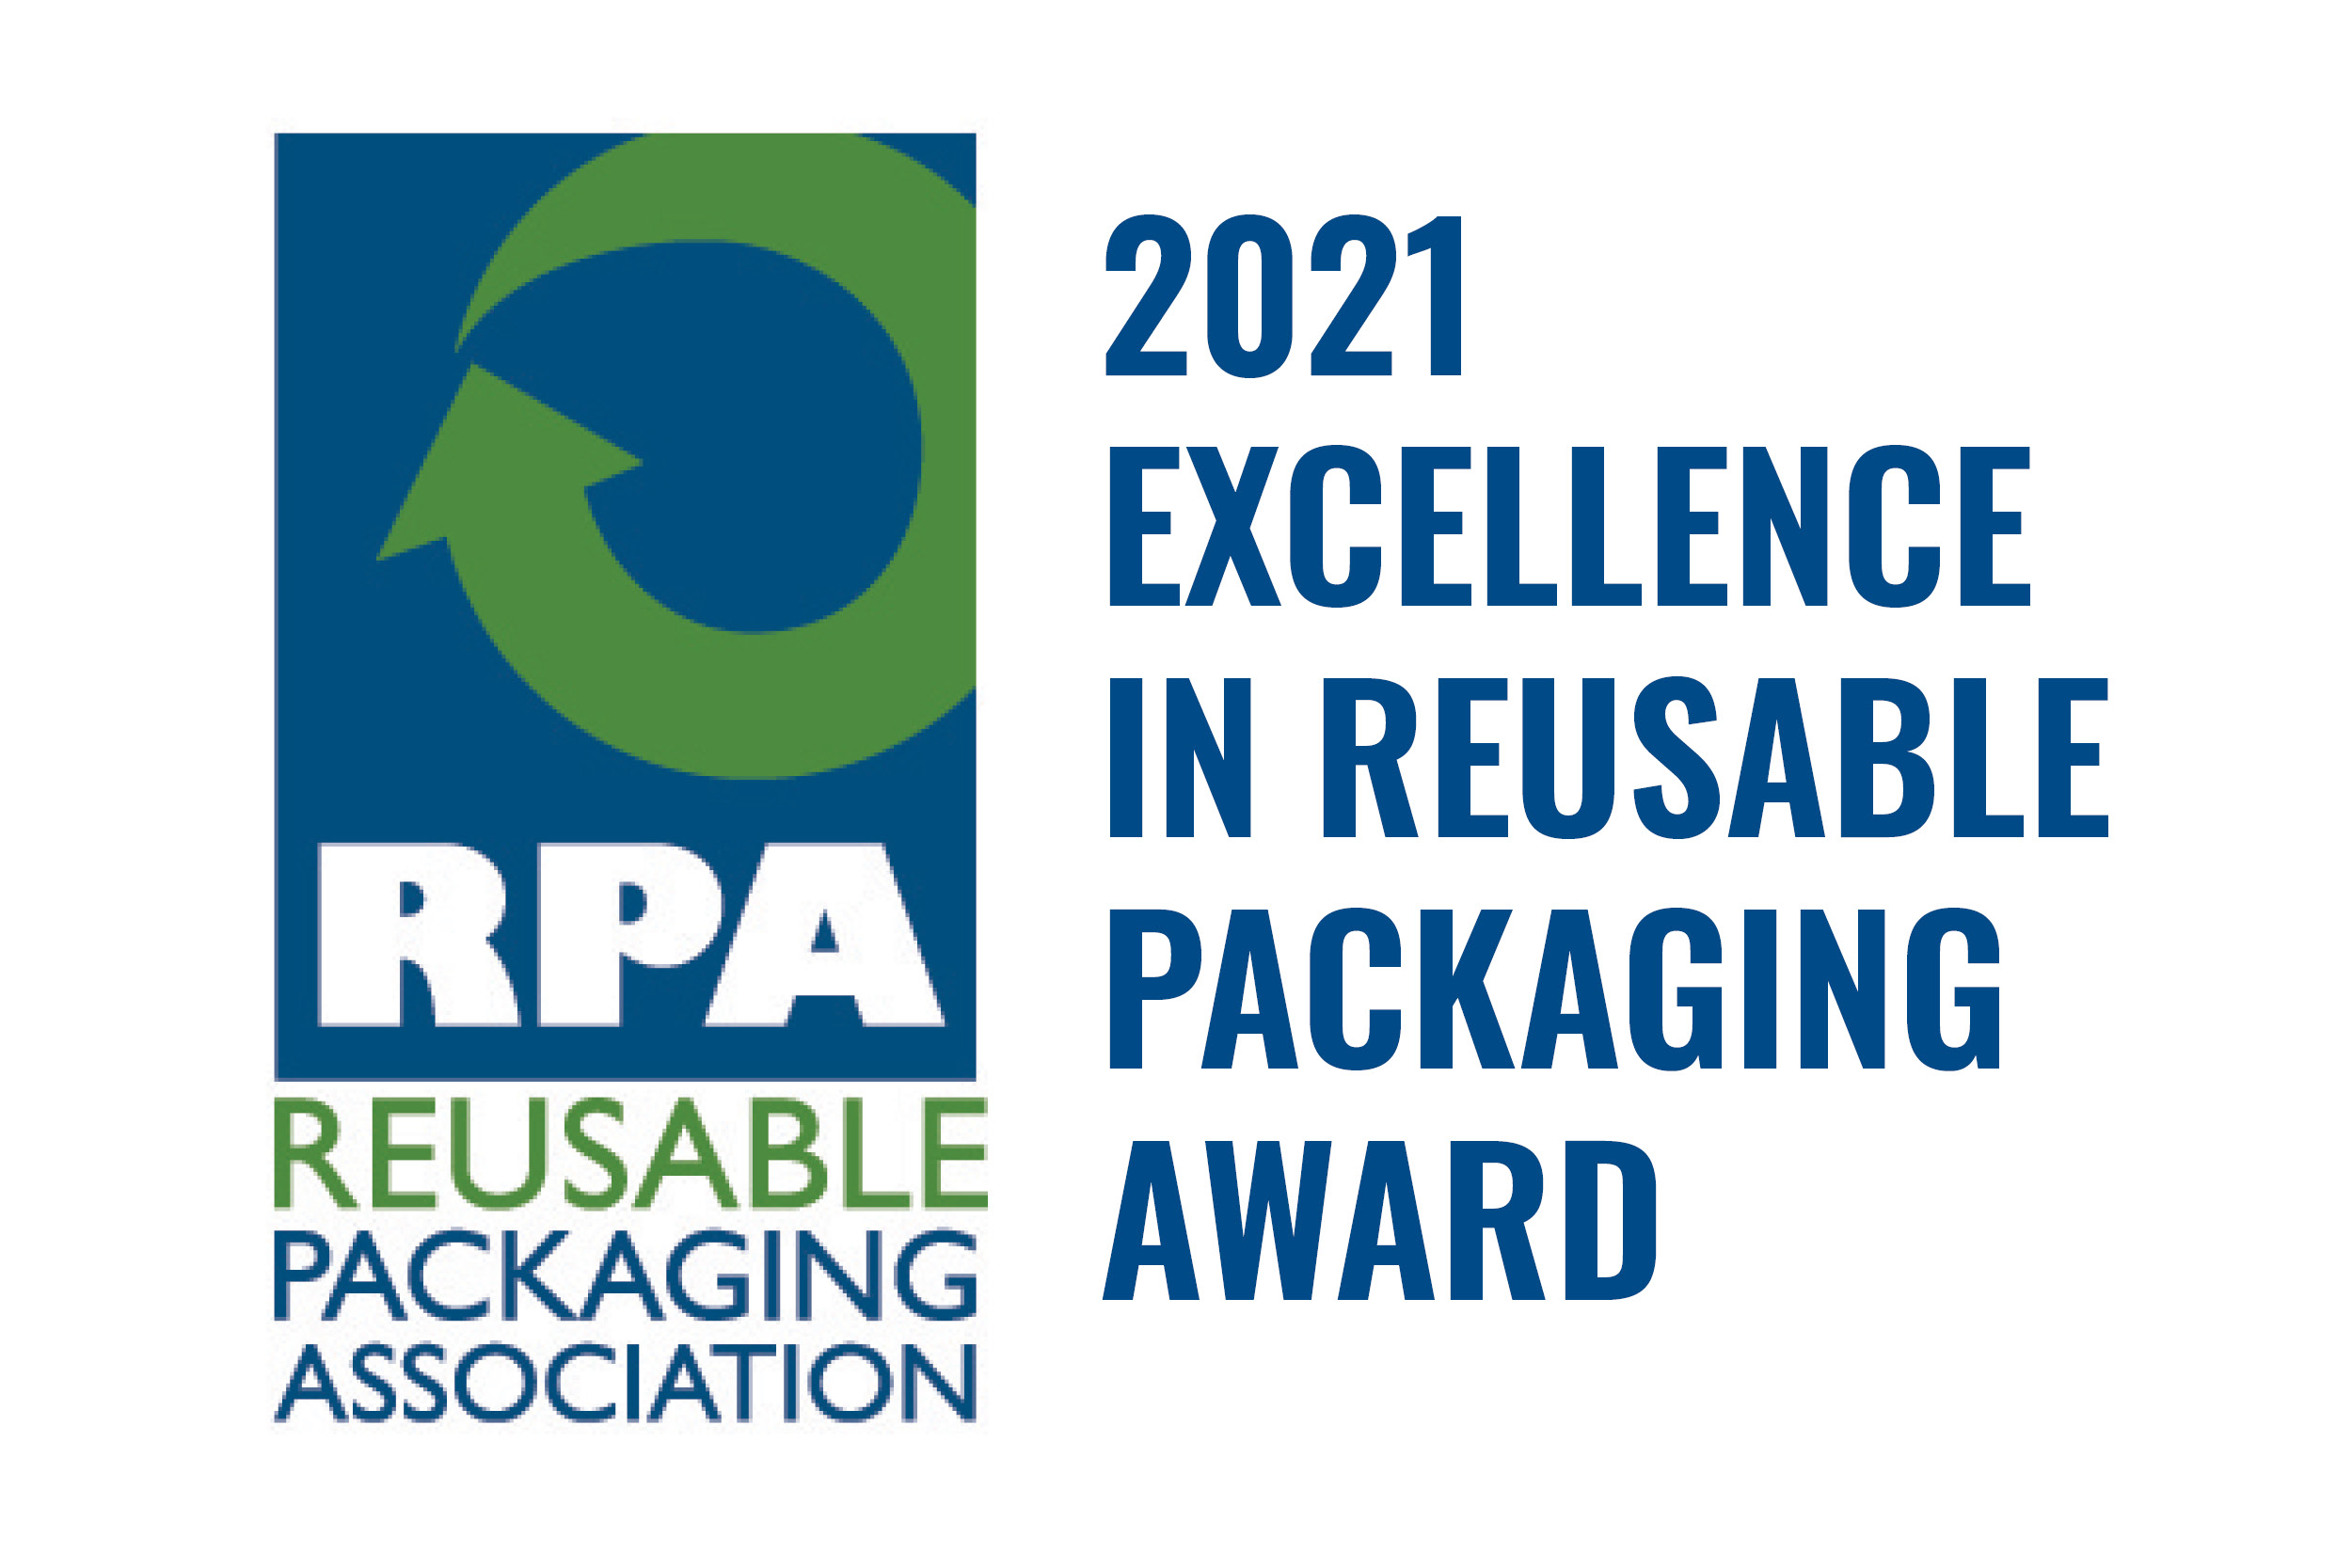 Call for Entries: 2021 Excellence in Reusable Packaging Award